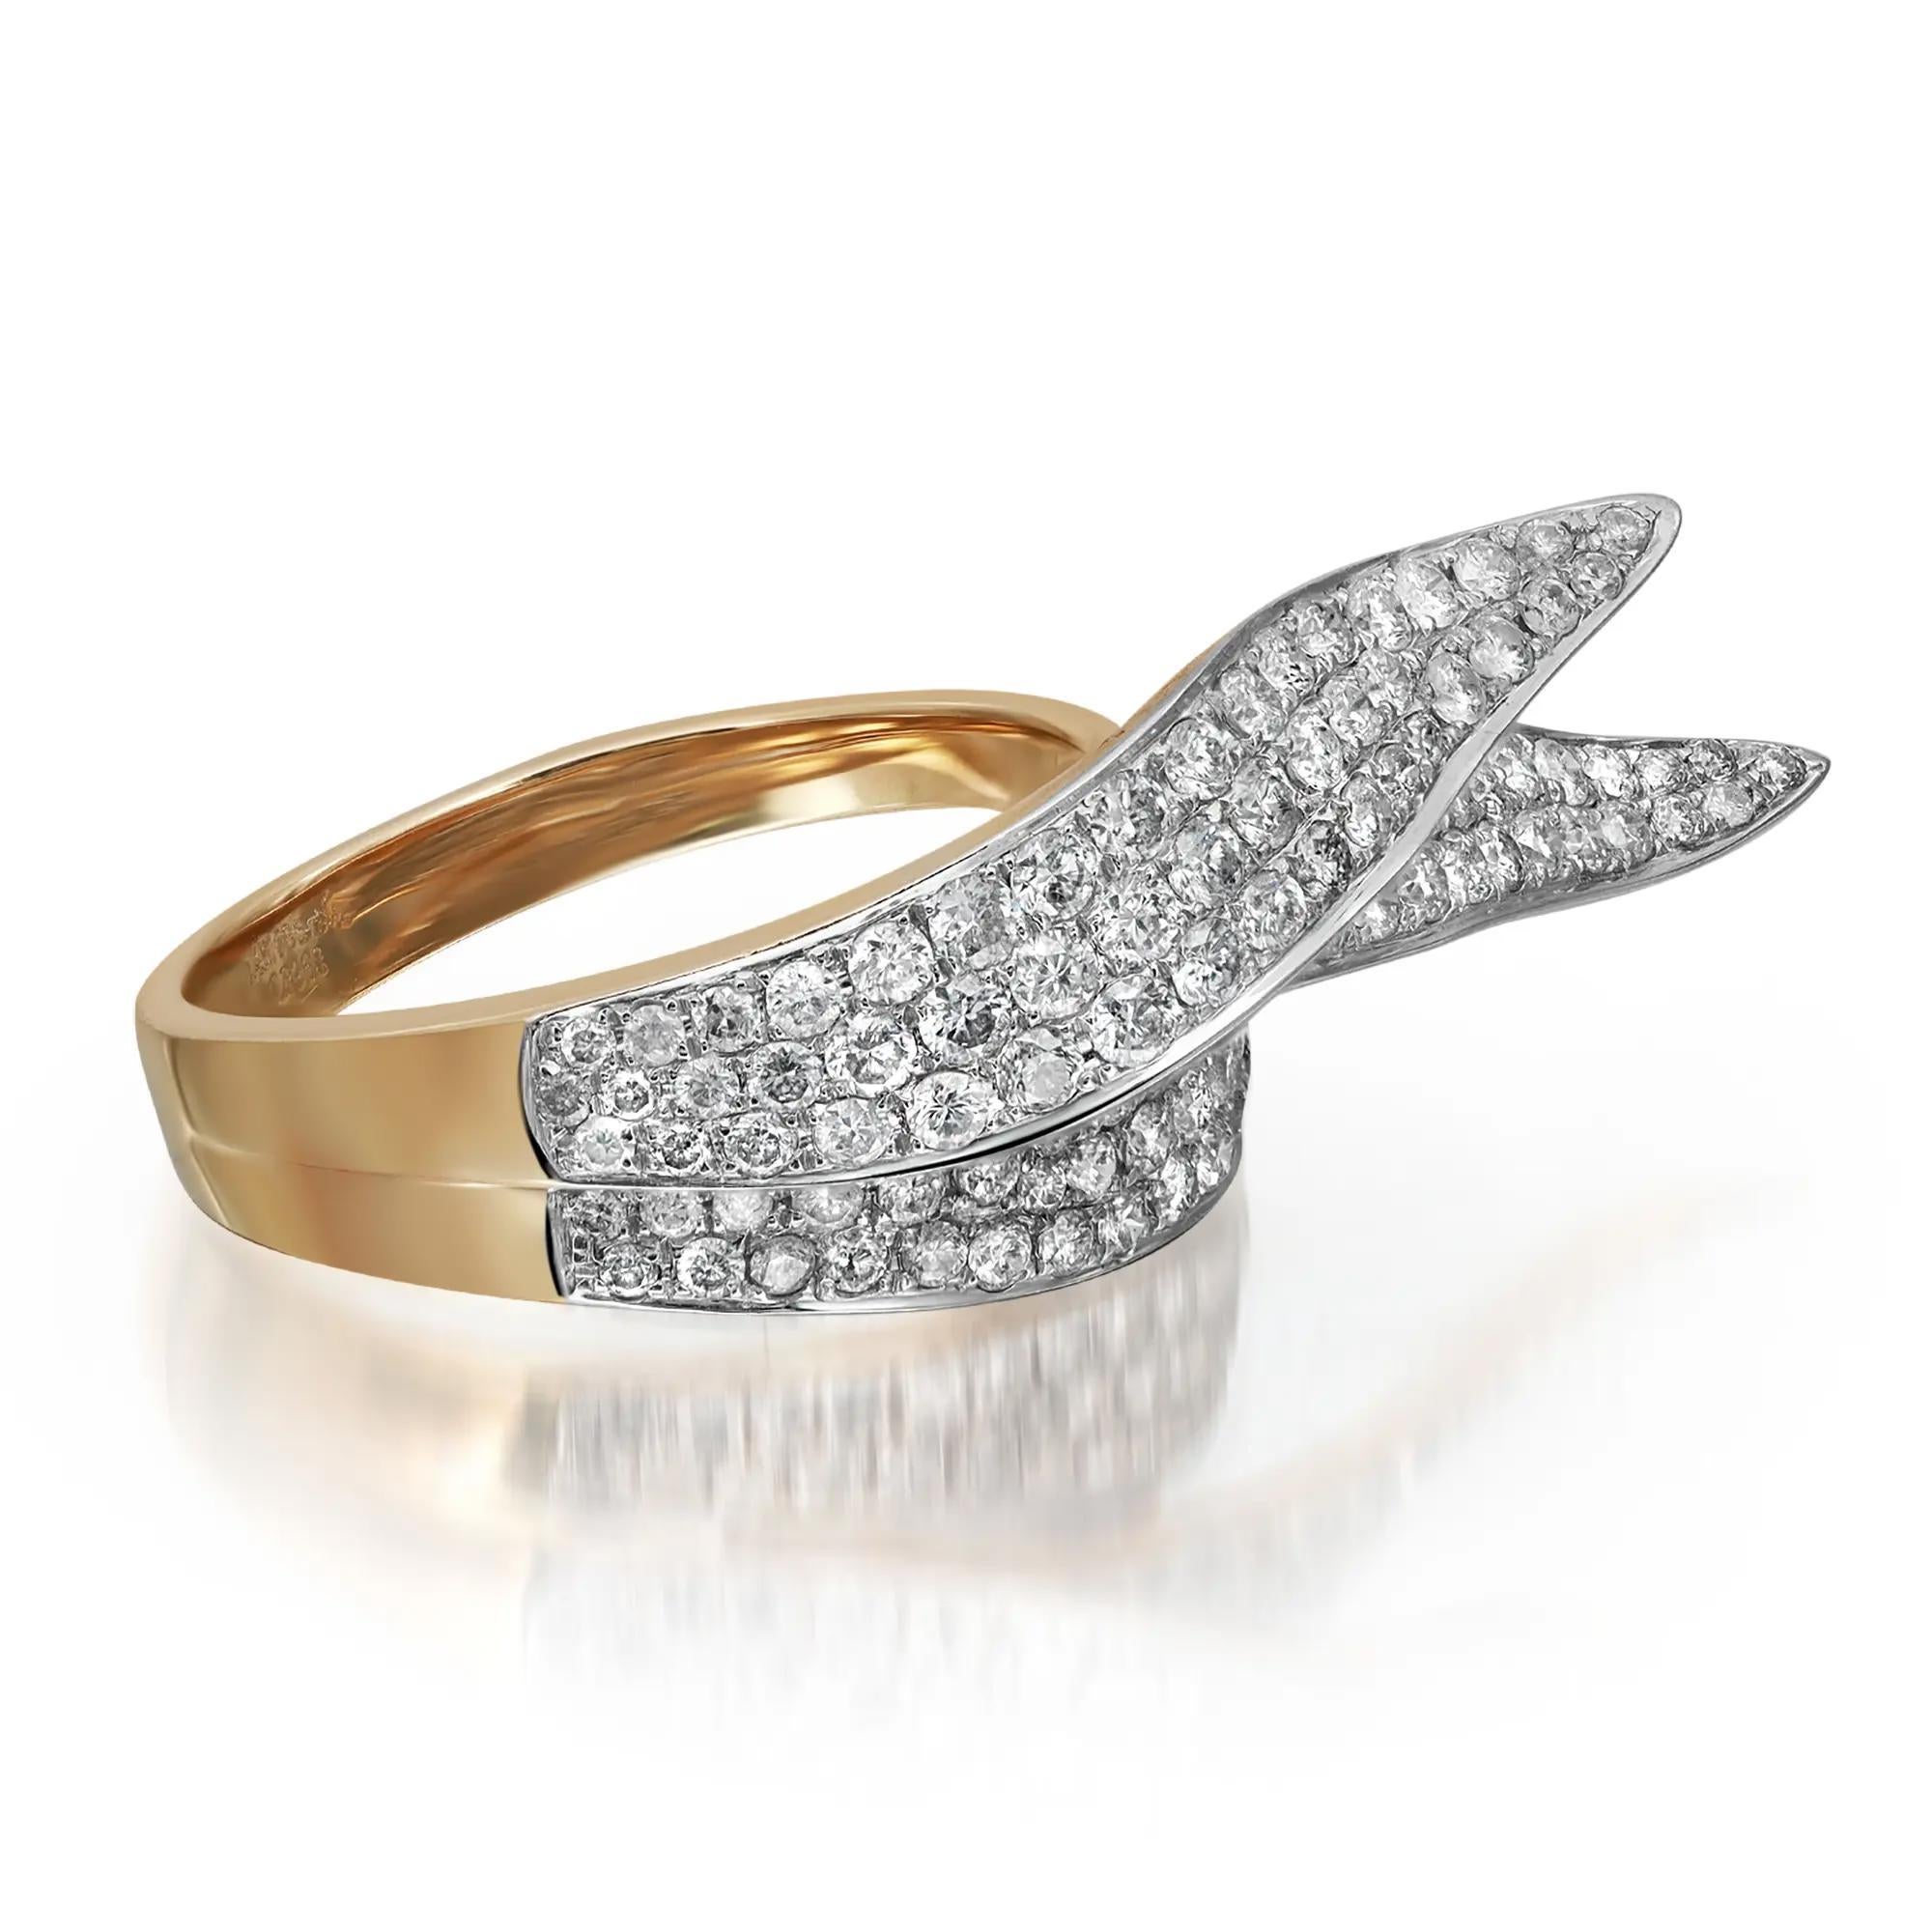 Fun and dramatic, this ladies diamond cocktail ring makes a perfect statement look. Crafted in lustrous 14K yellow gold. It features pave set round brilliant cut diamonds weight 1.47 carats. Diamond quality: color I and clarity SI. Ring size: 7.5.